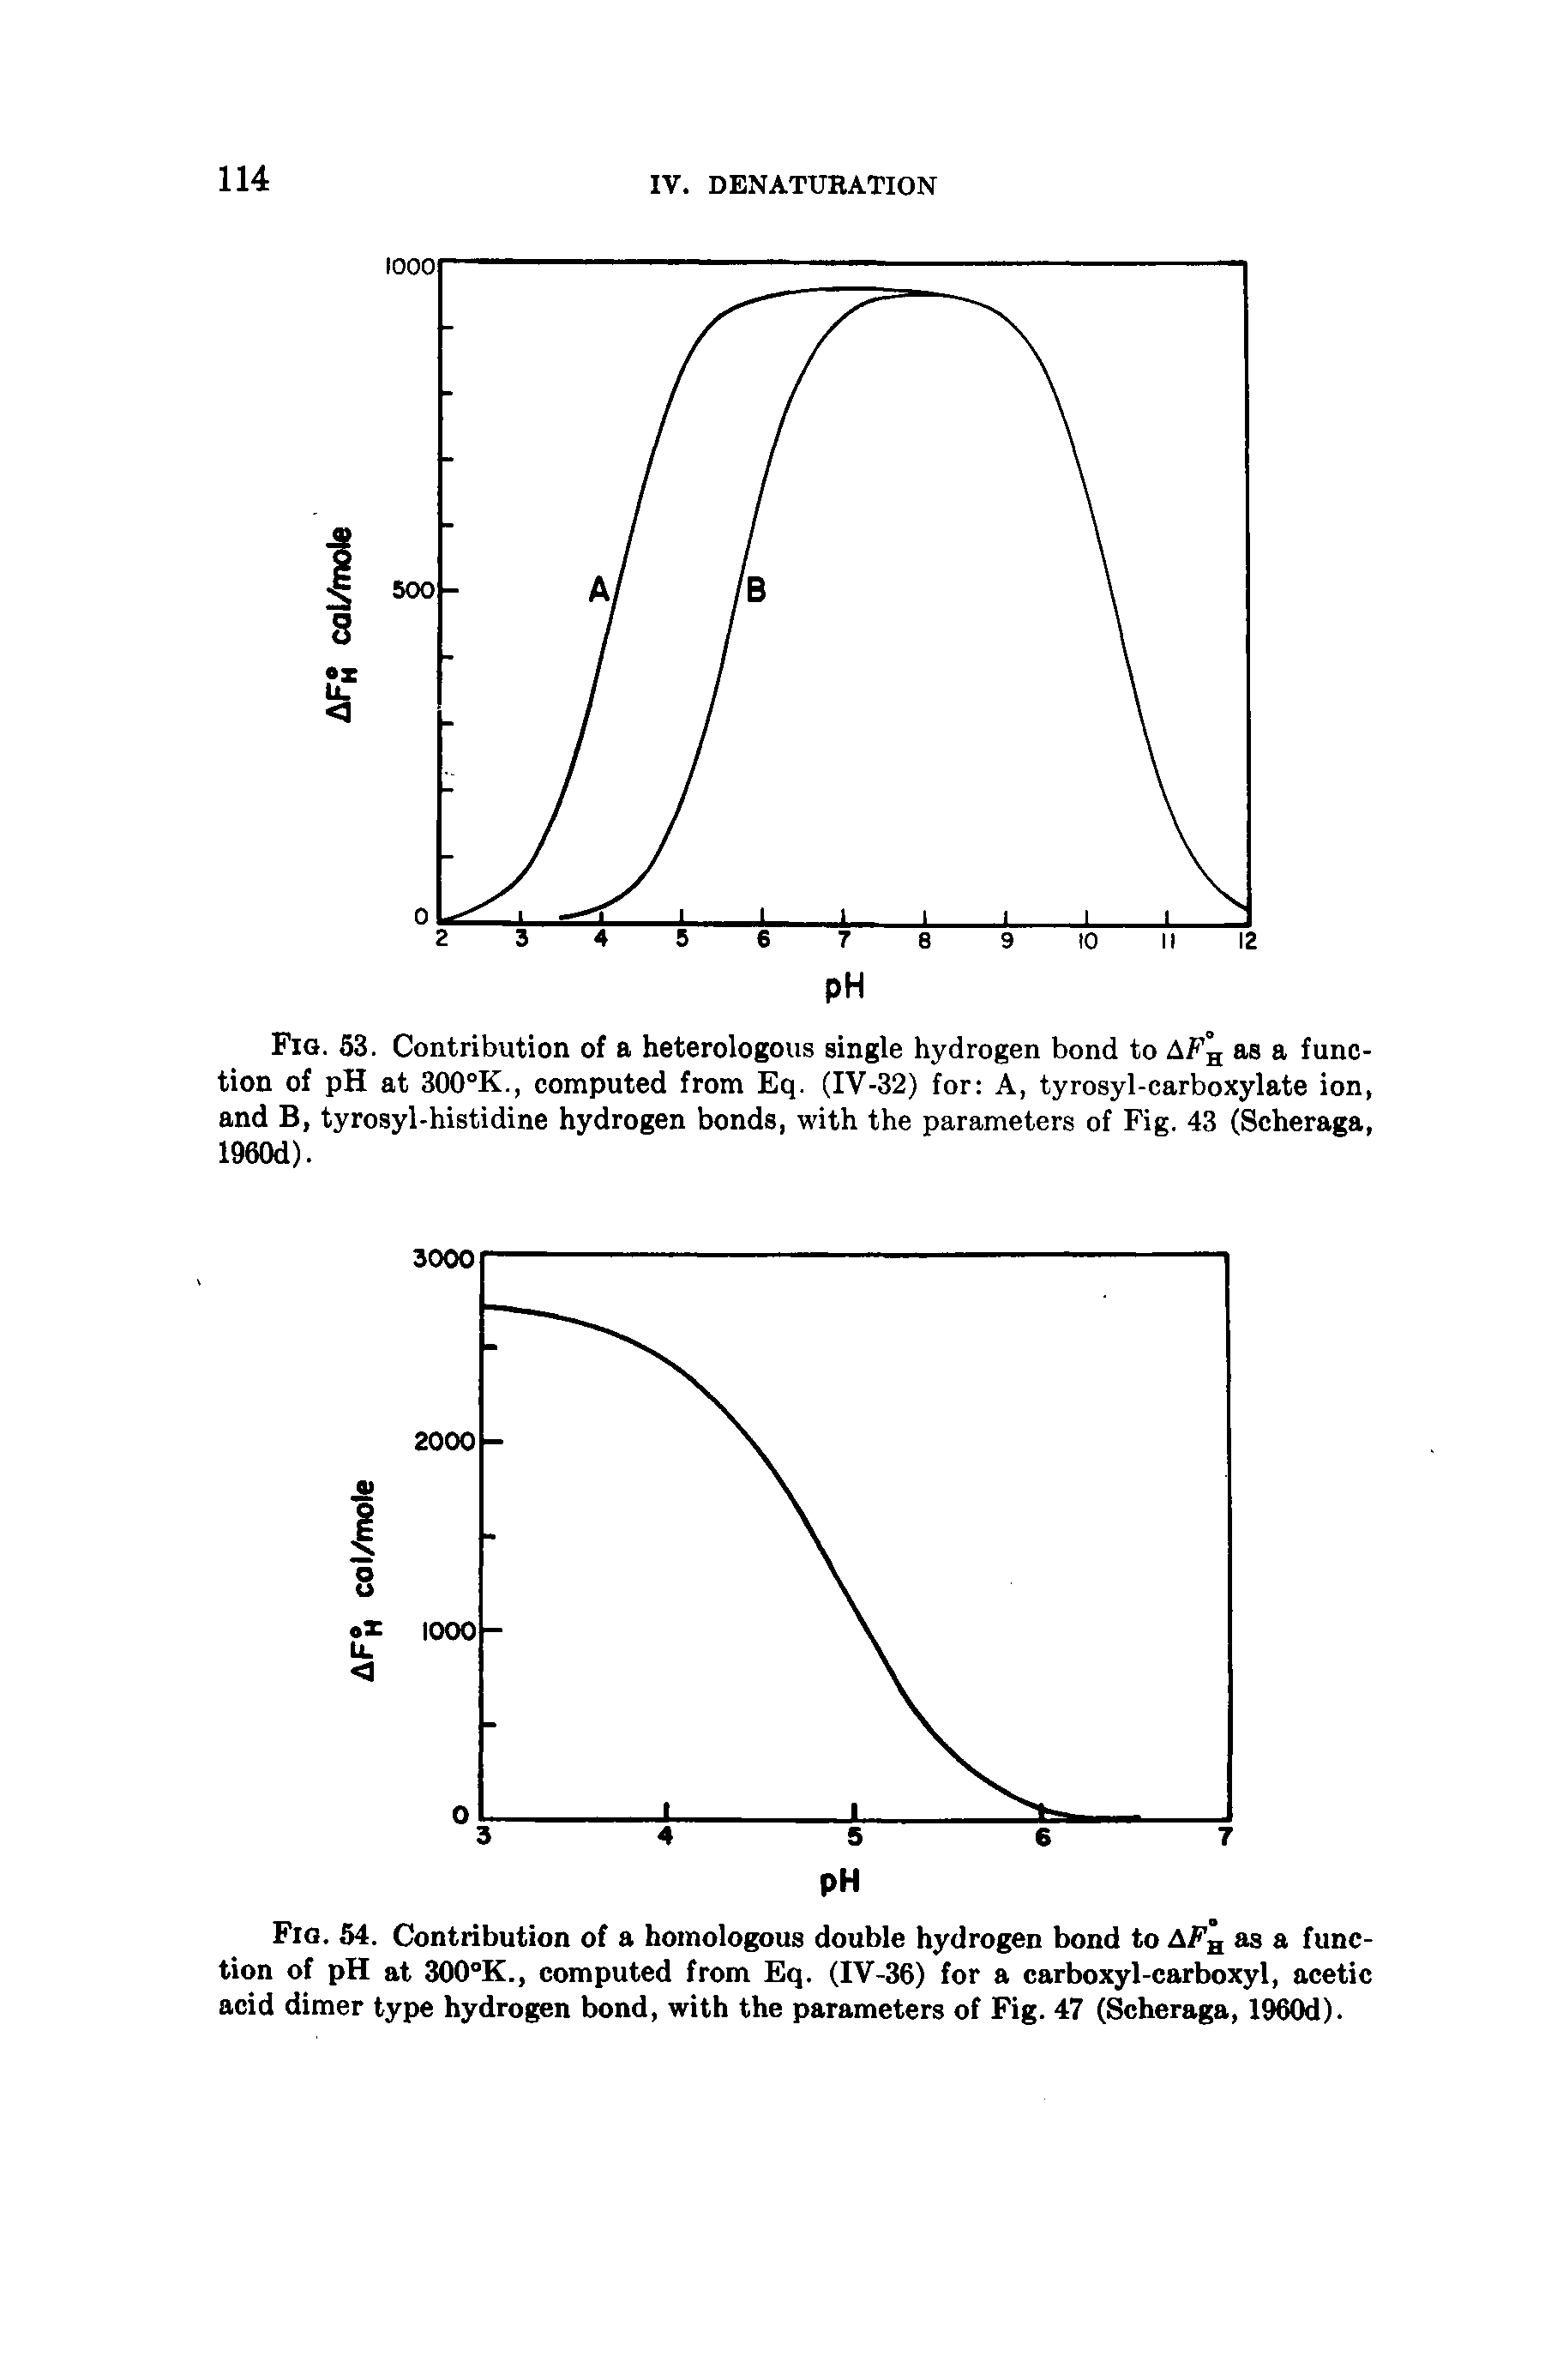 Fig. 63. Contribution of a heterologous single hydrogen bond to AFg as a function of pH at 300°K., computed from Eq. (IV-32) for A, tyrosyl-carboxylate ion, and B, tyrosyl-histidine hydrogen bonds, with the parameters of Fig. 43 (Scheraga, 1960d).